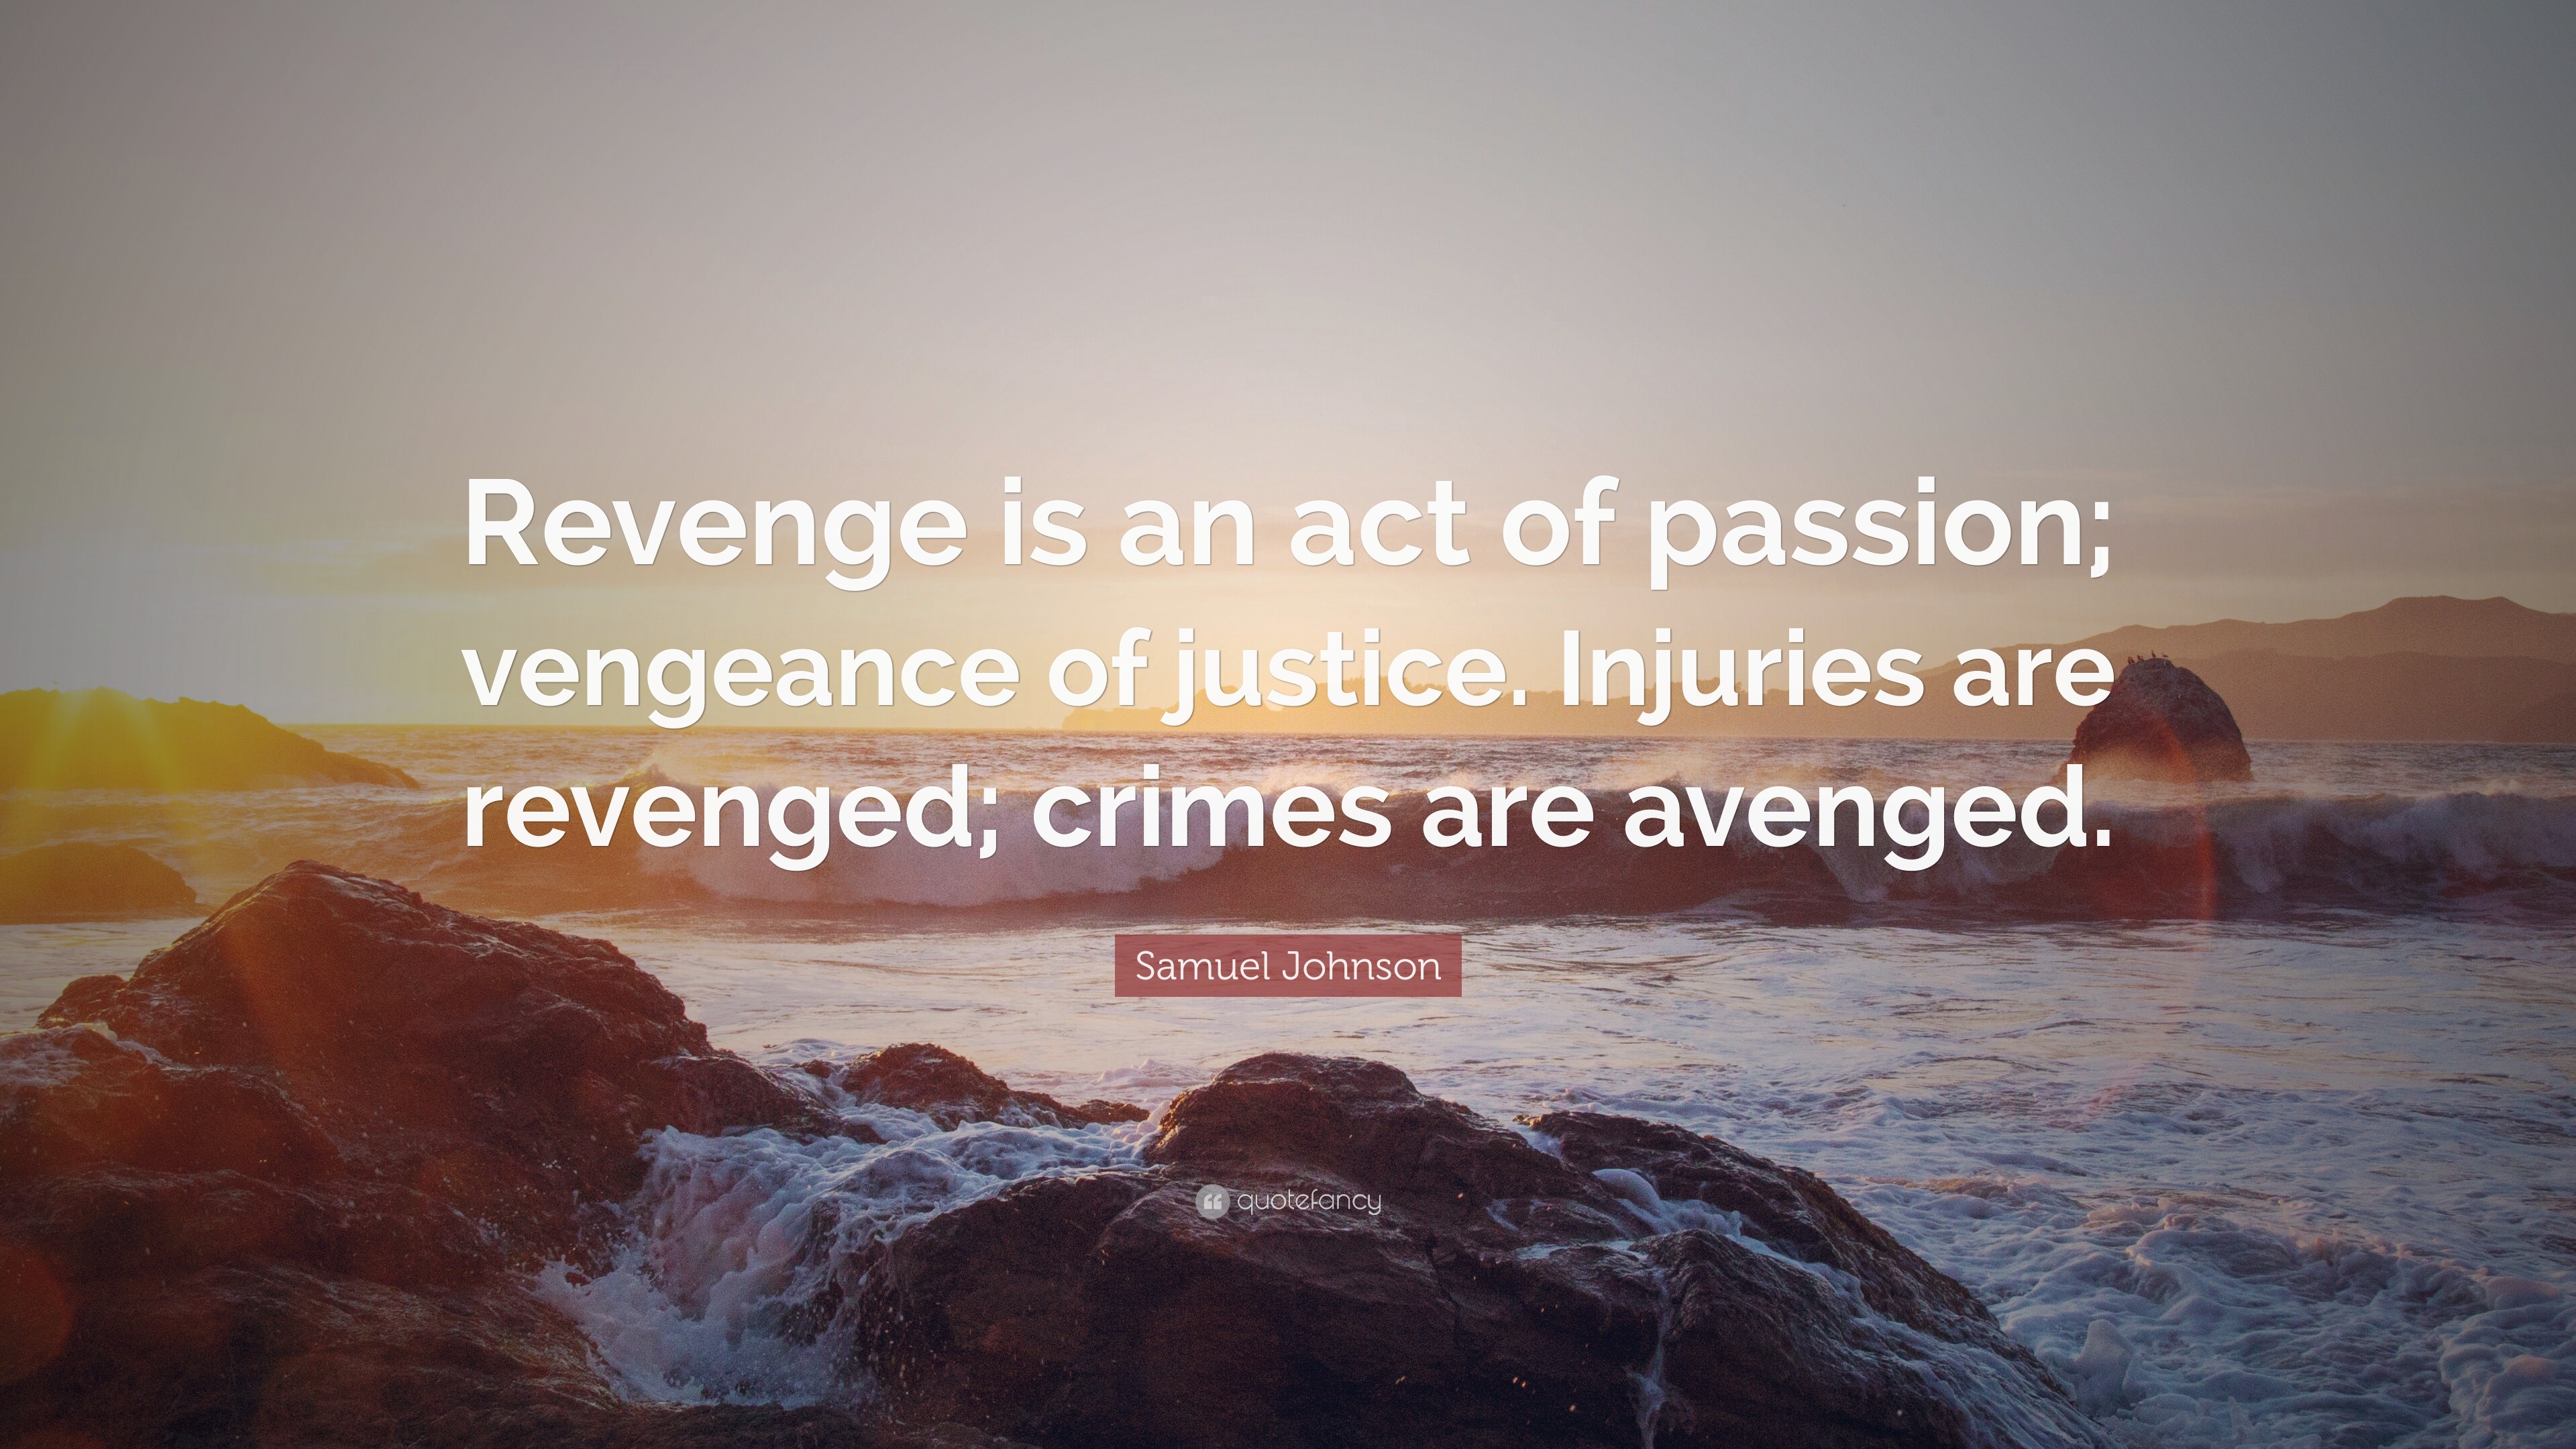 Samuel Johnson quote: Revenge is an act of passion; vengeance of